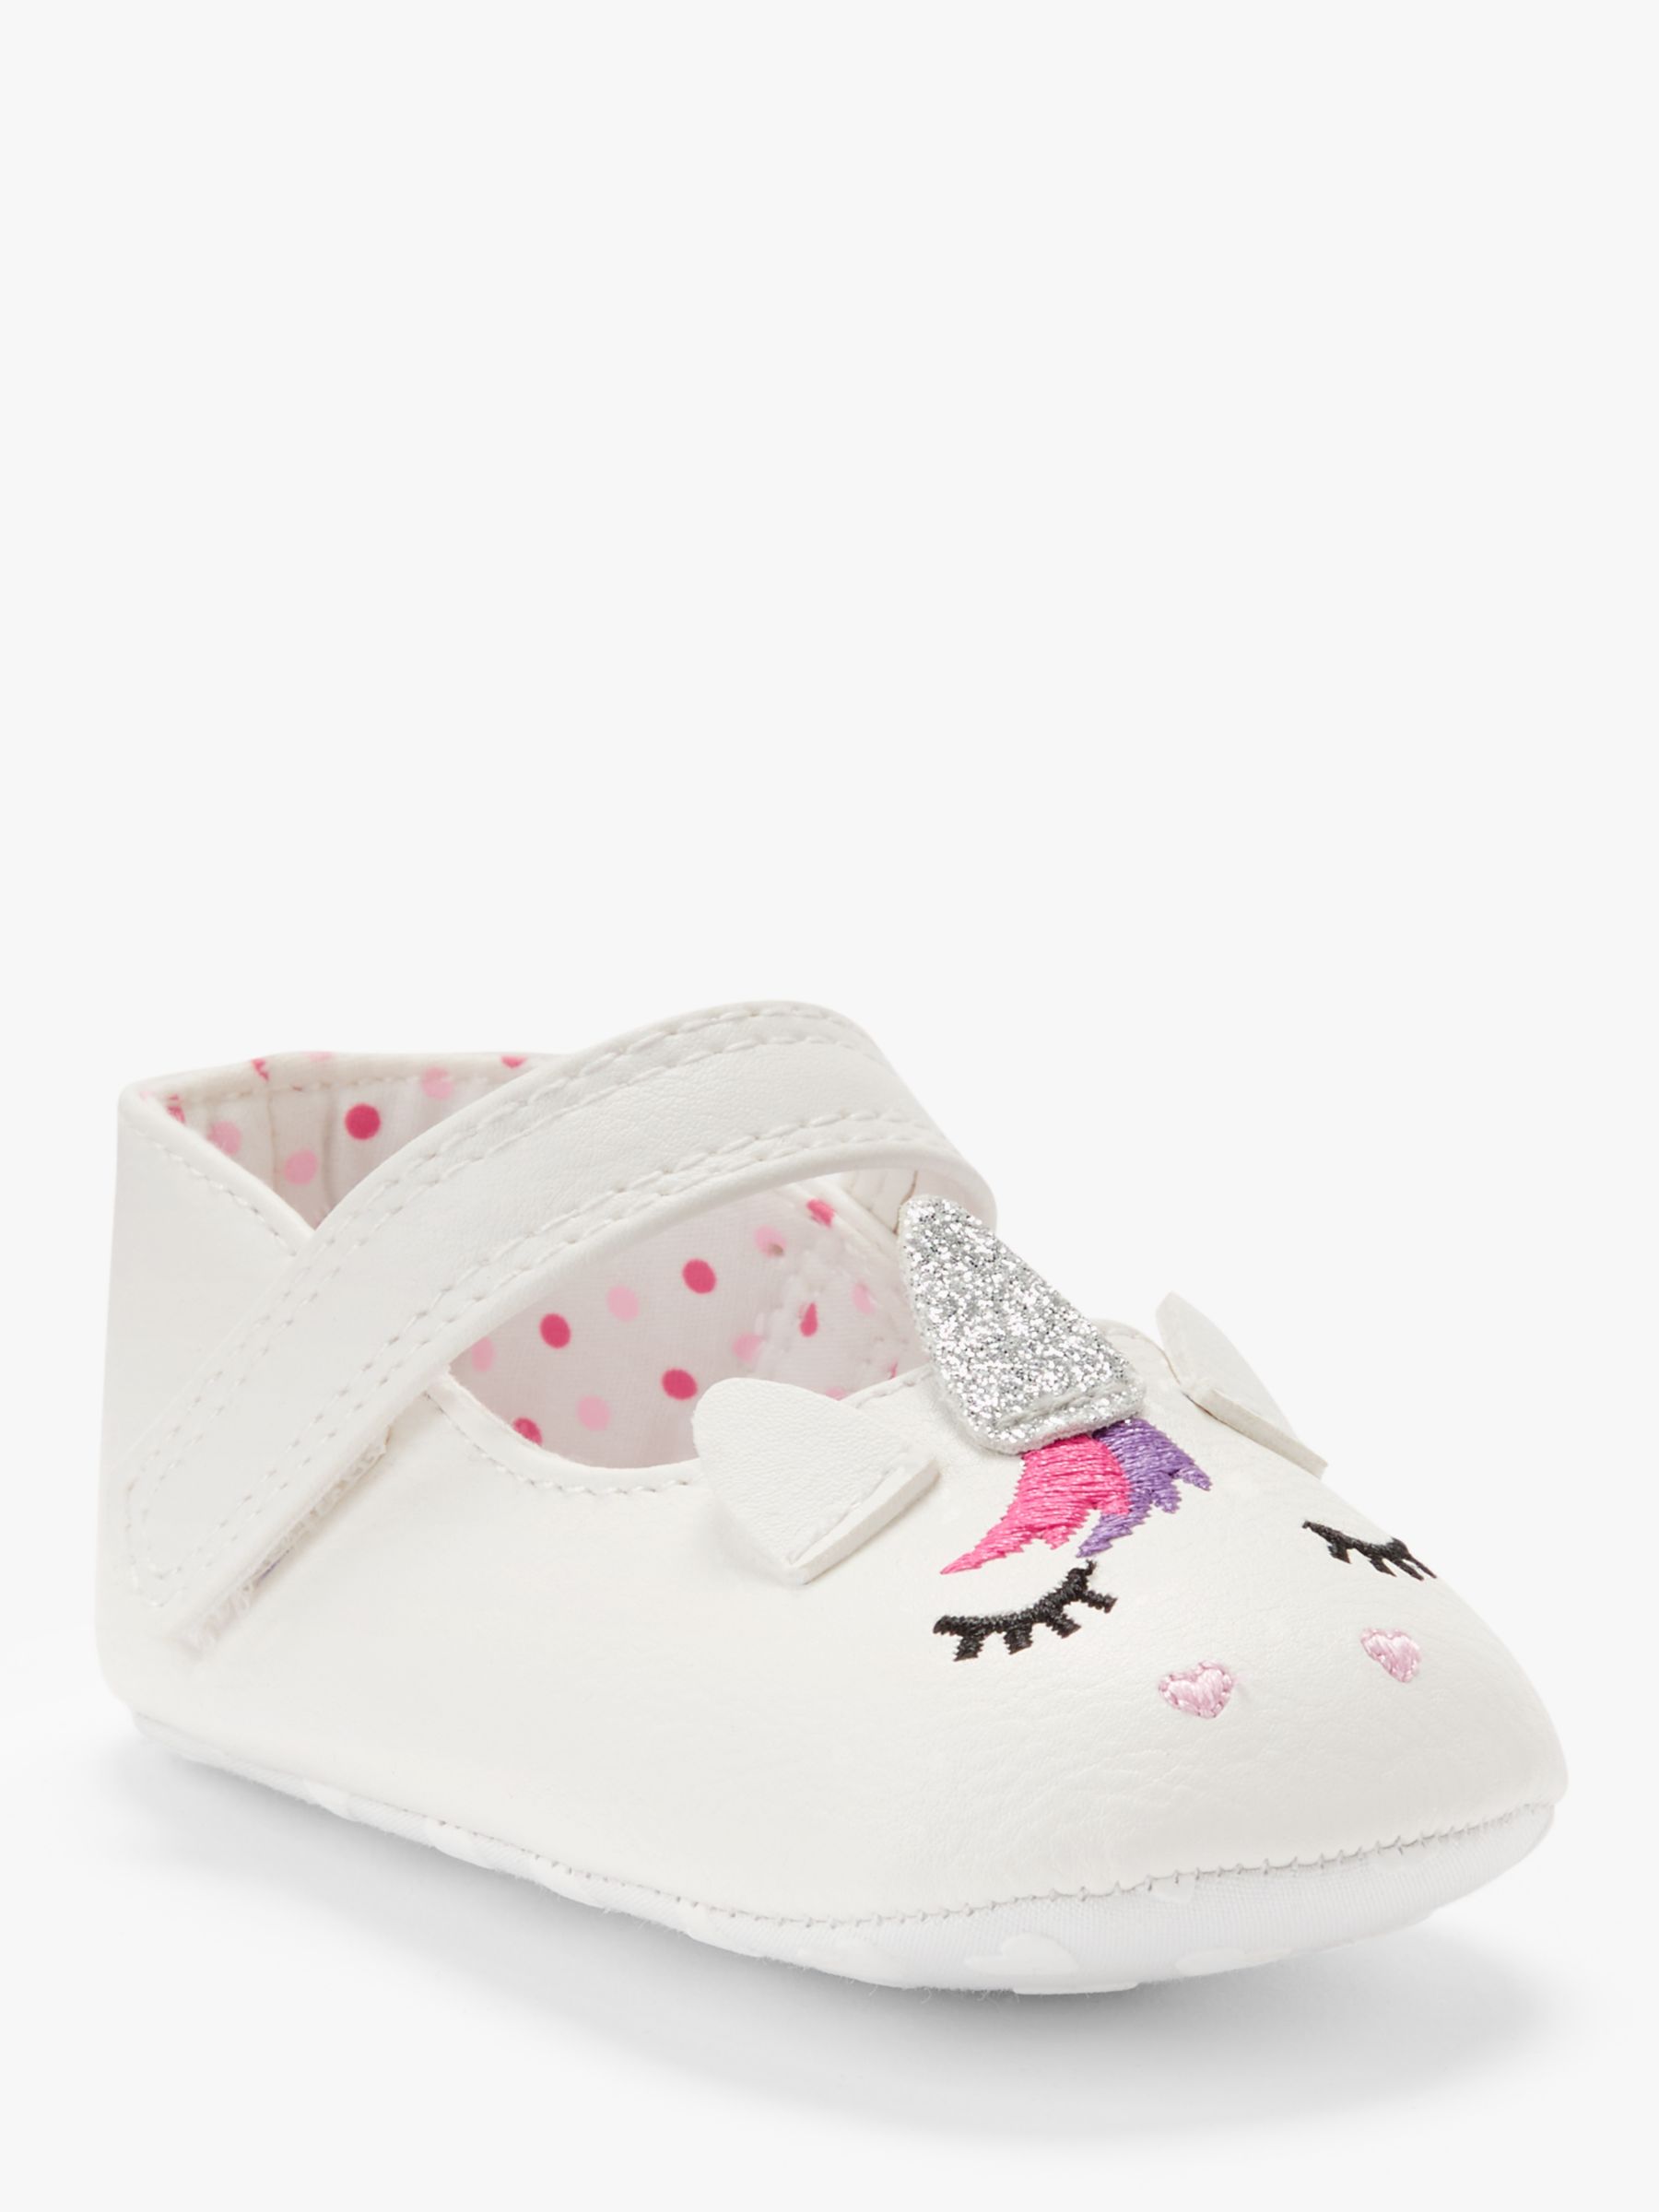 6 month baby shoes online